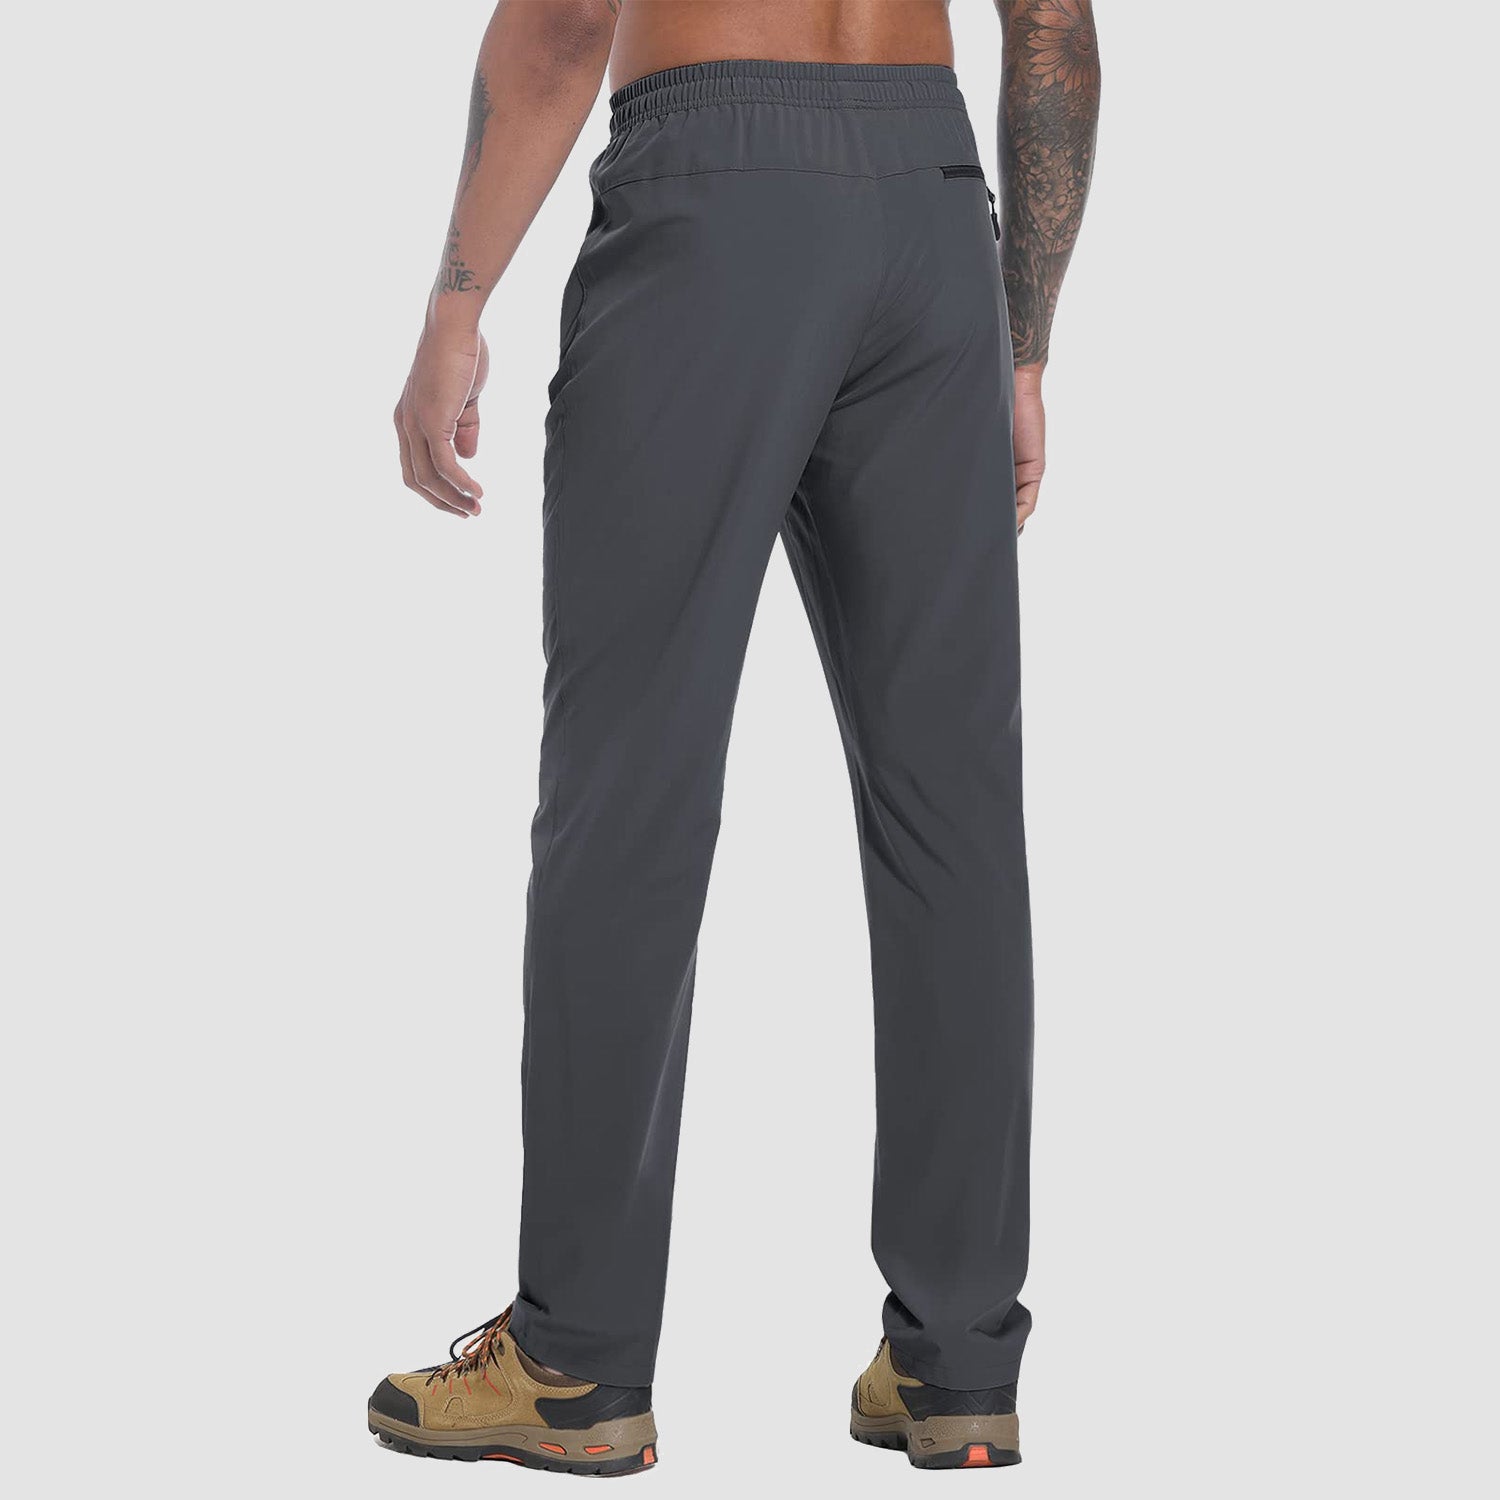 Men's Quick Dry Pants Stretch Hiking Pants Running Trousers Lightweight Breathable